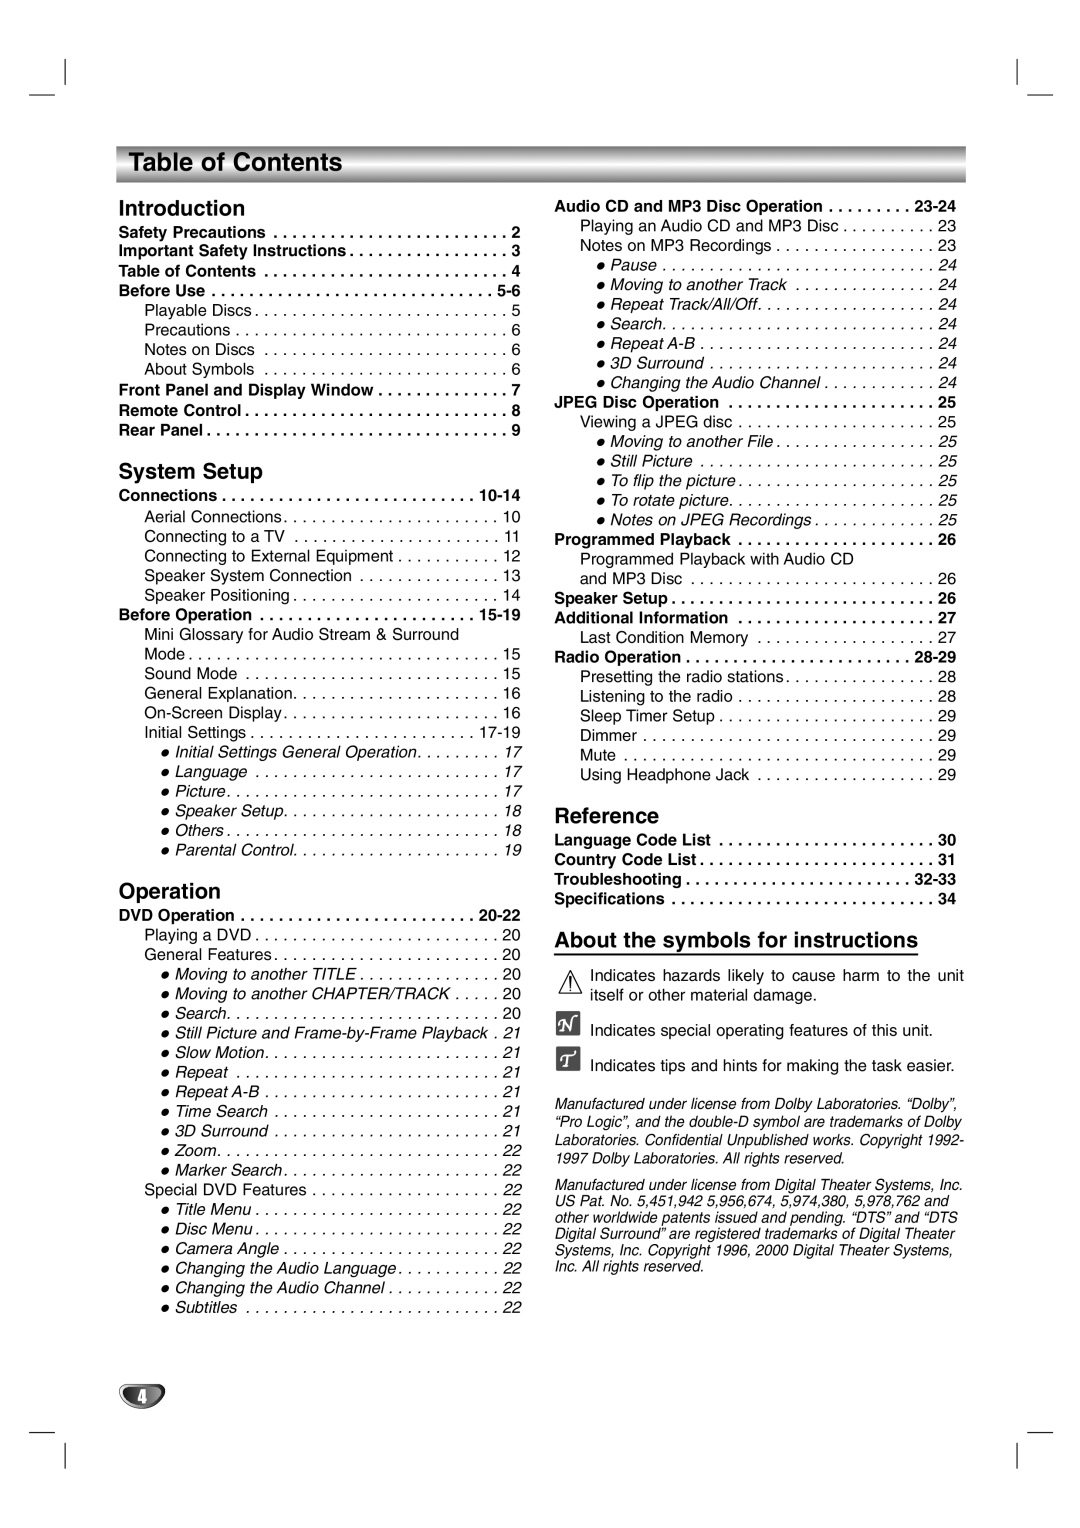 Zenith DVT312 Table of Contents, Introduction, System Setup, Operation, Reference, About the symbols for instructions 